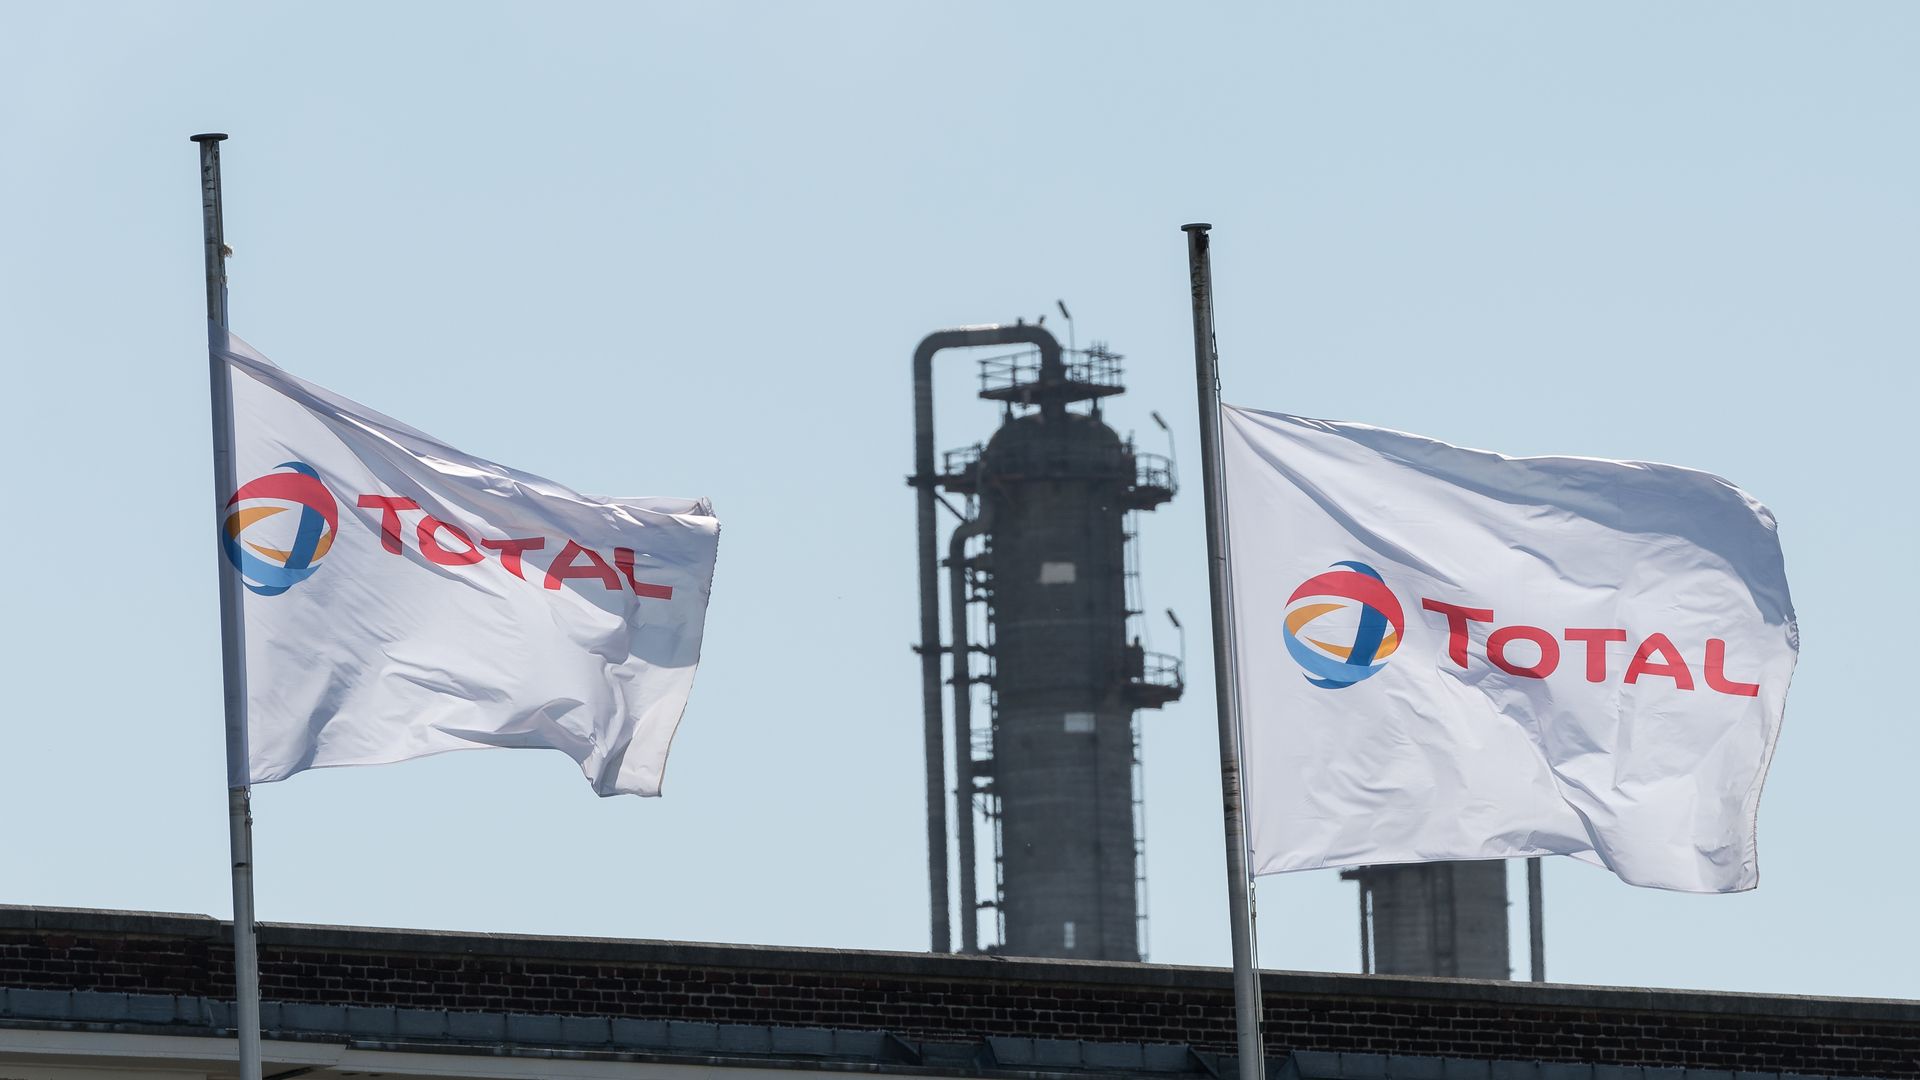 total flags flying over a rig